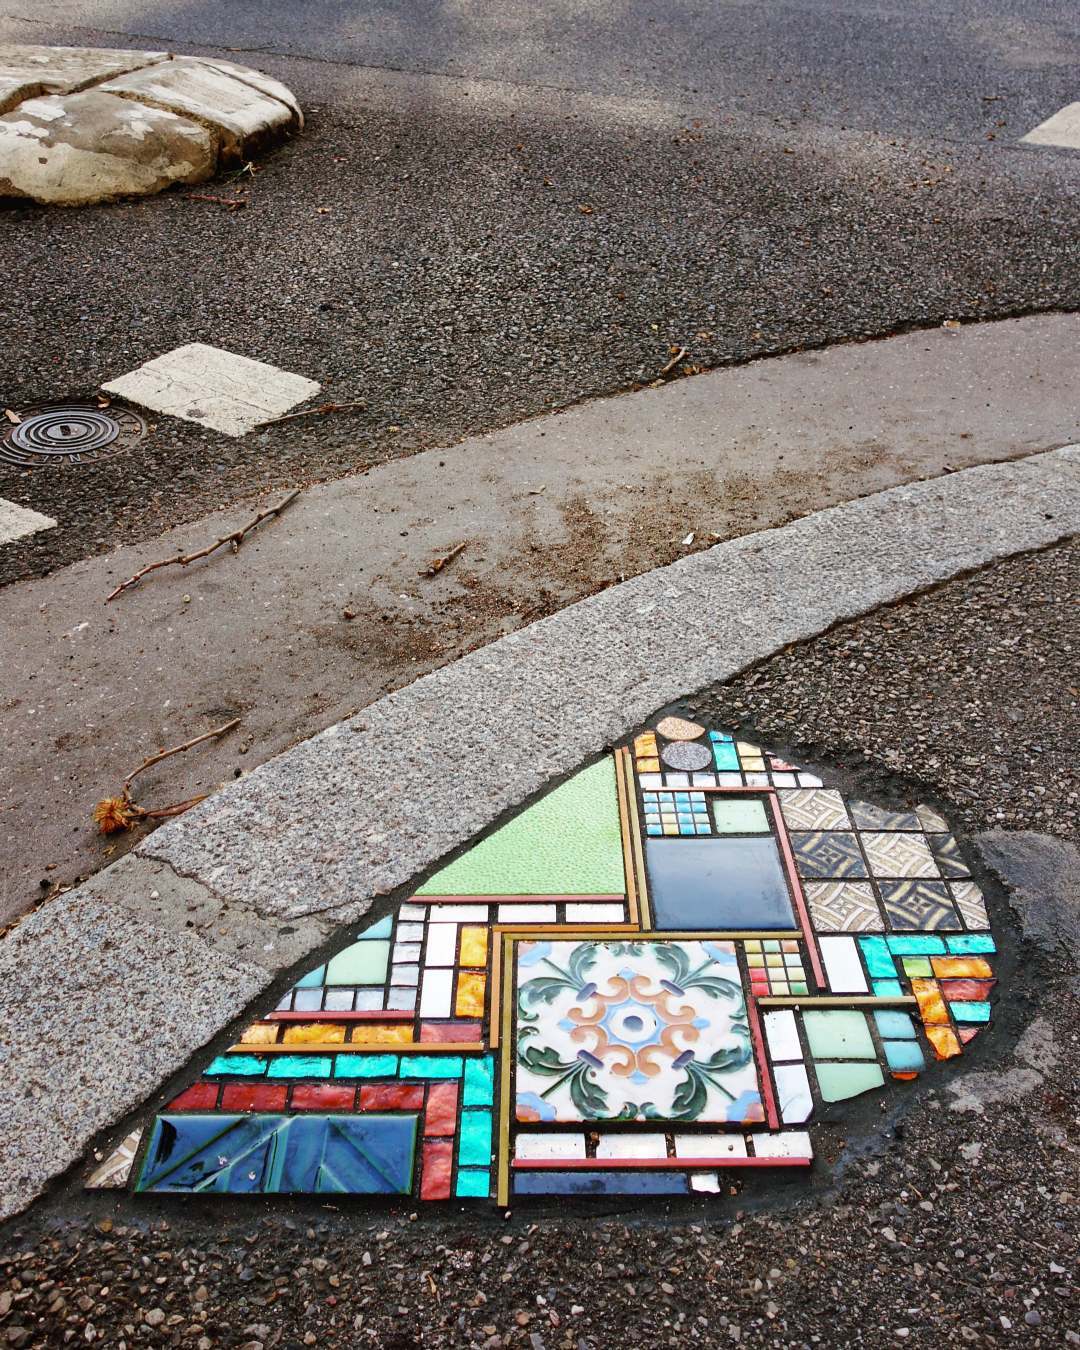 Fractured Sidewalks Pavements And Walls Repaired With Vibrant Tiled Mosaics By Ememem 19